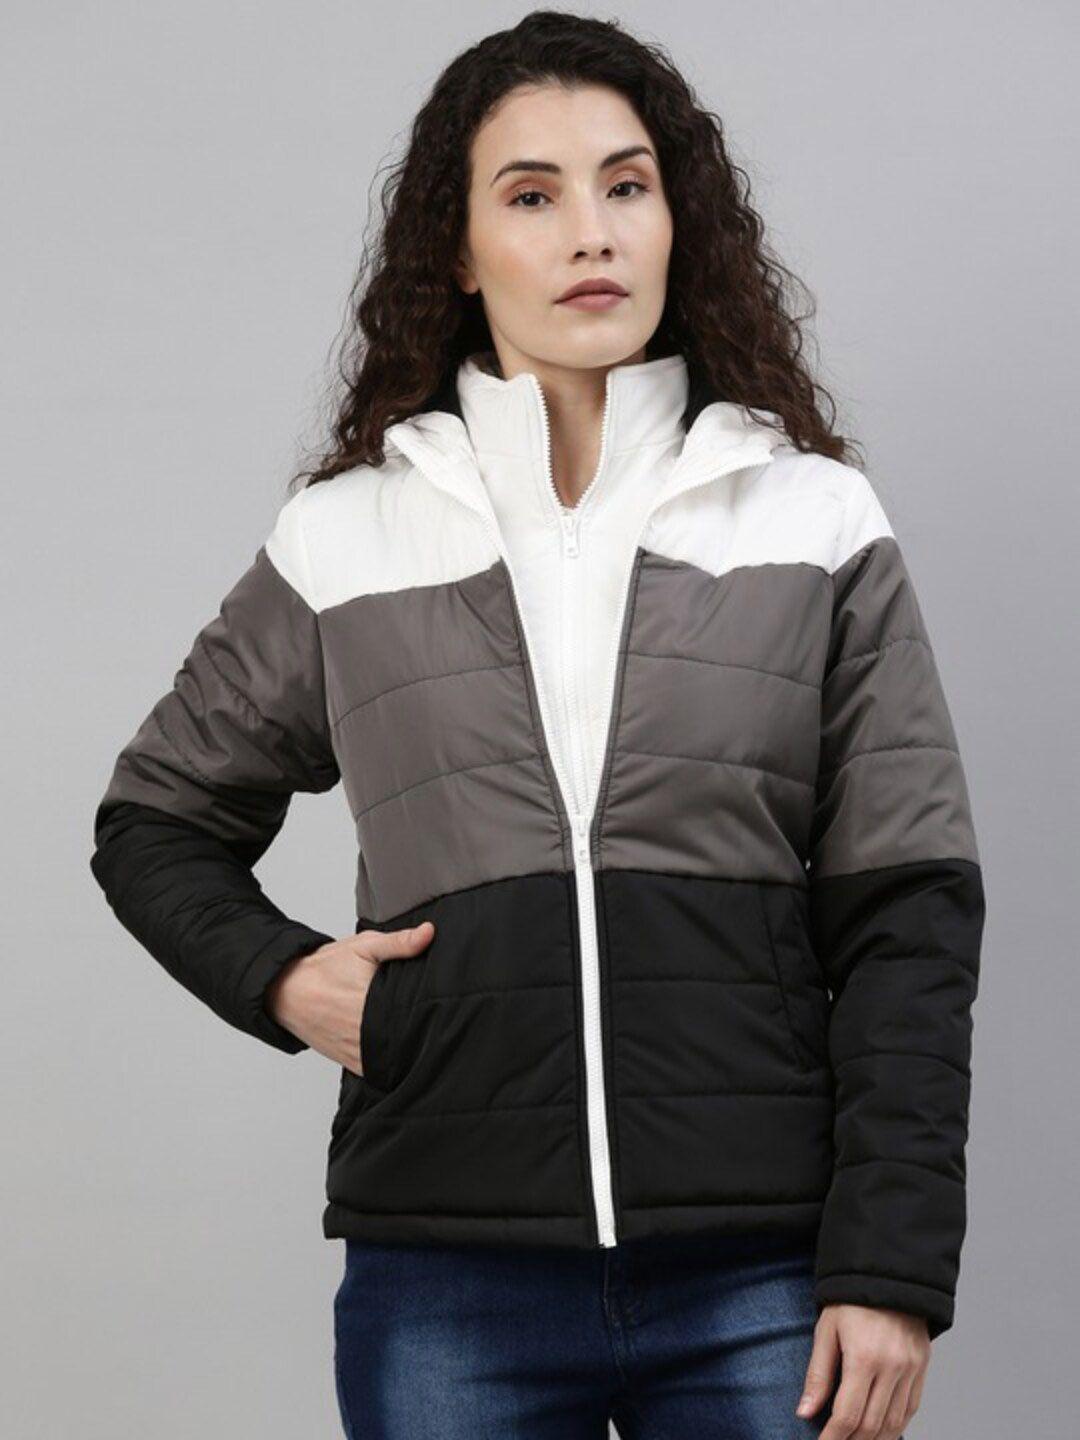 campus sutra white & grey colourblocked windcheater outdoor hooded puffer jacket